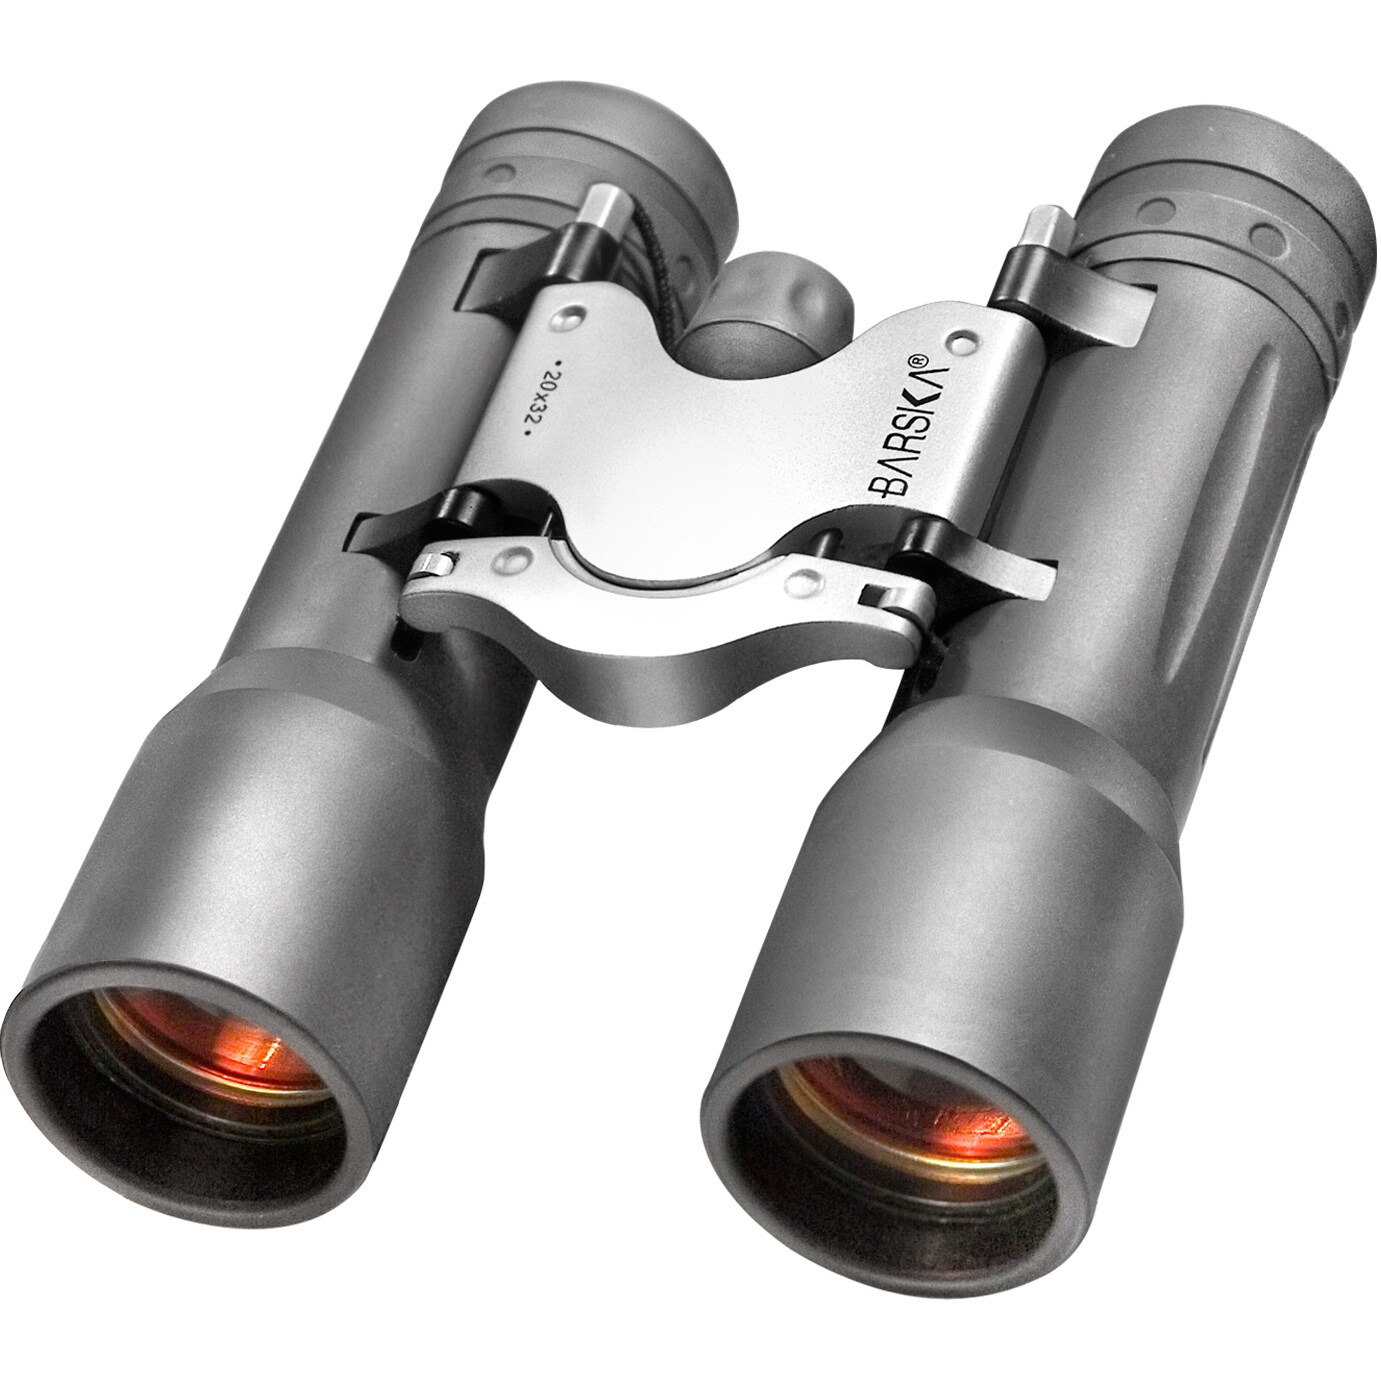 Barska 20x32 Trend Binocular (Silver accentMagnification 20x32Objective diameter 32Angle of view StraightField of view 147 feet at 49 yardsClose focusing distance 26/8Exit pupil 1.6 mmEye relief 10 mmLens coating Multi coatedLens color RubyPrism 